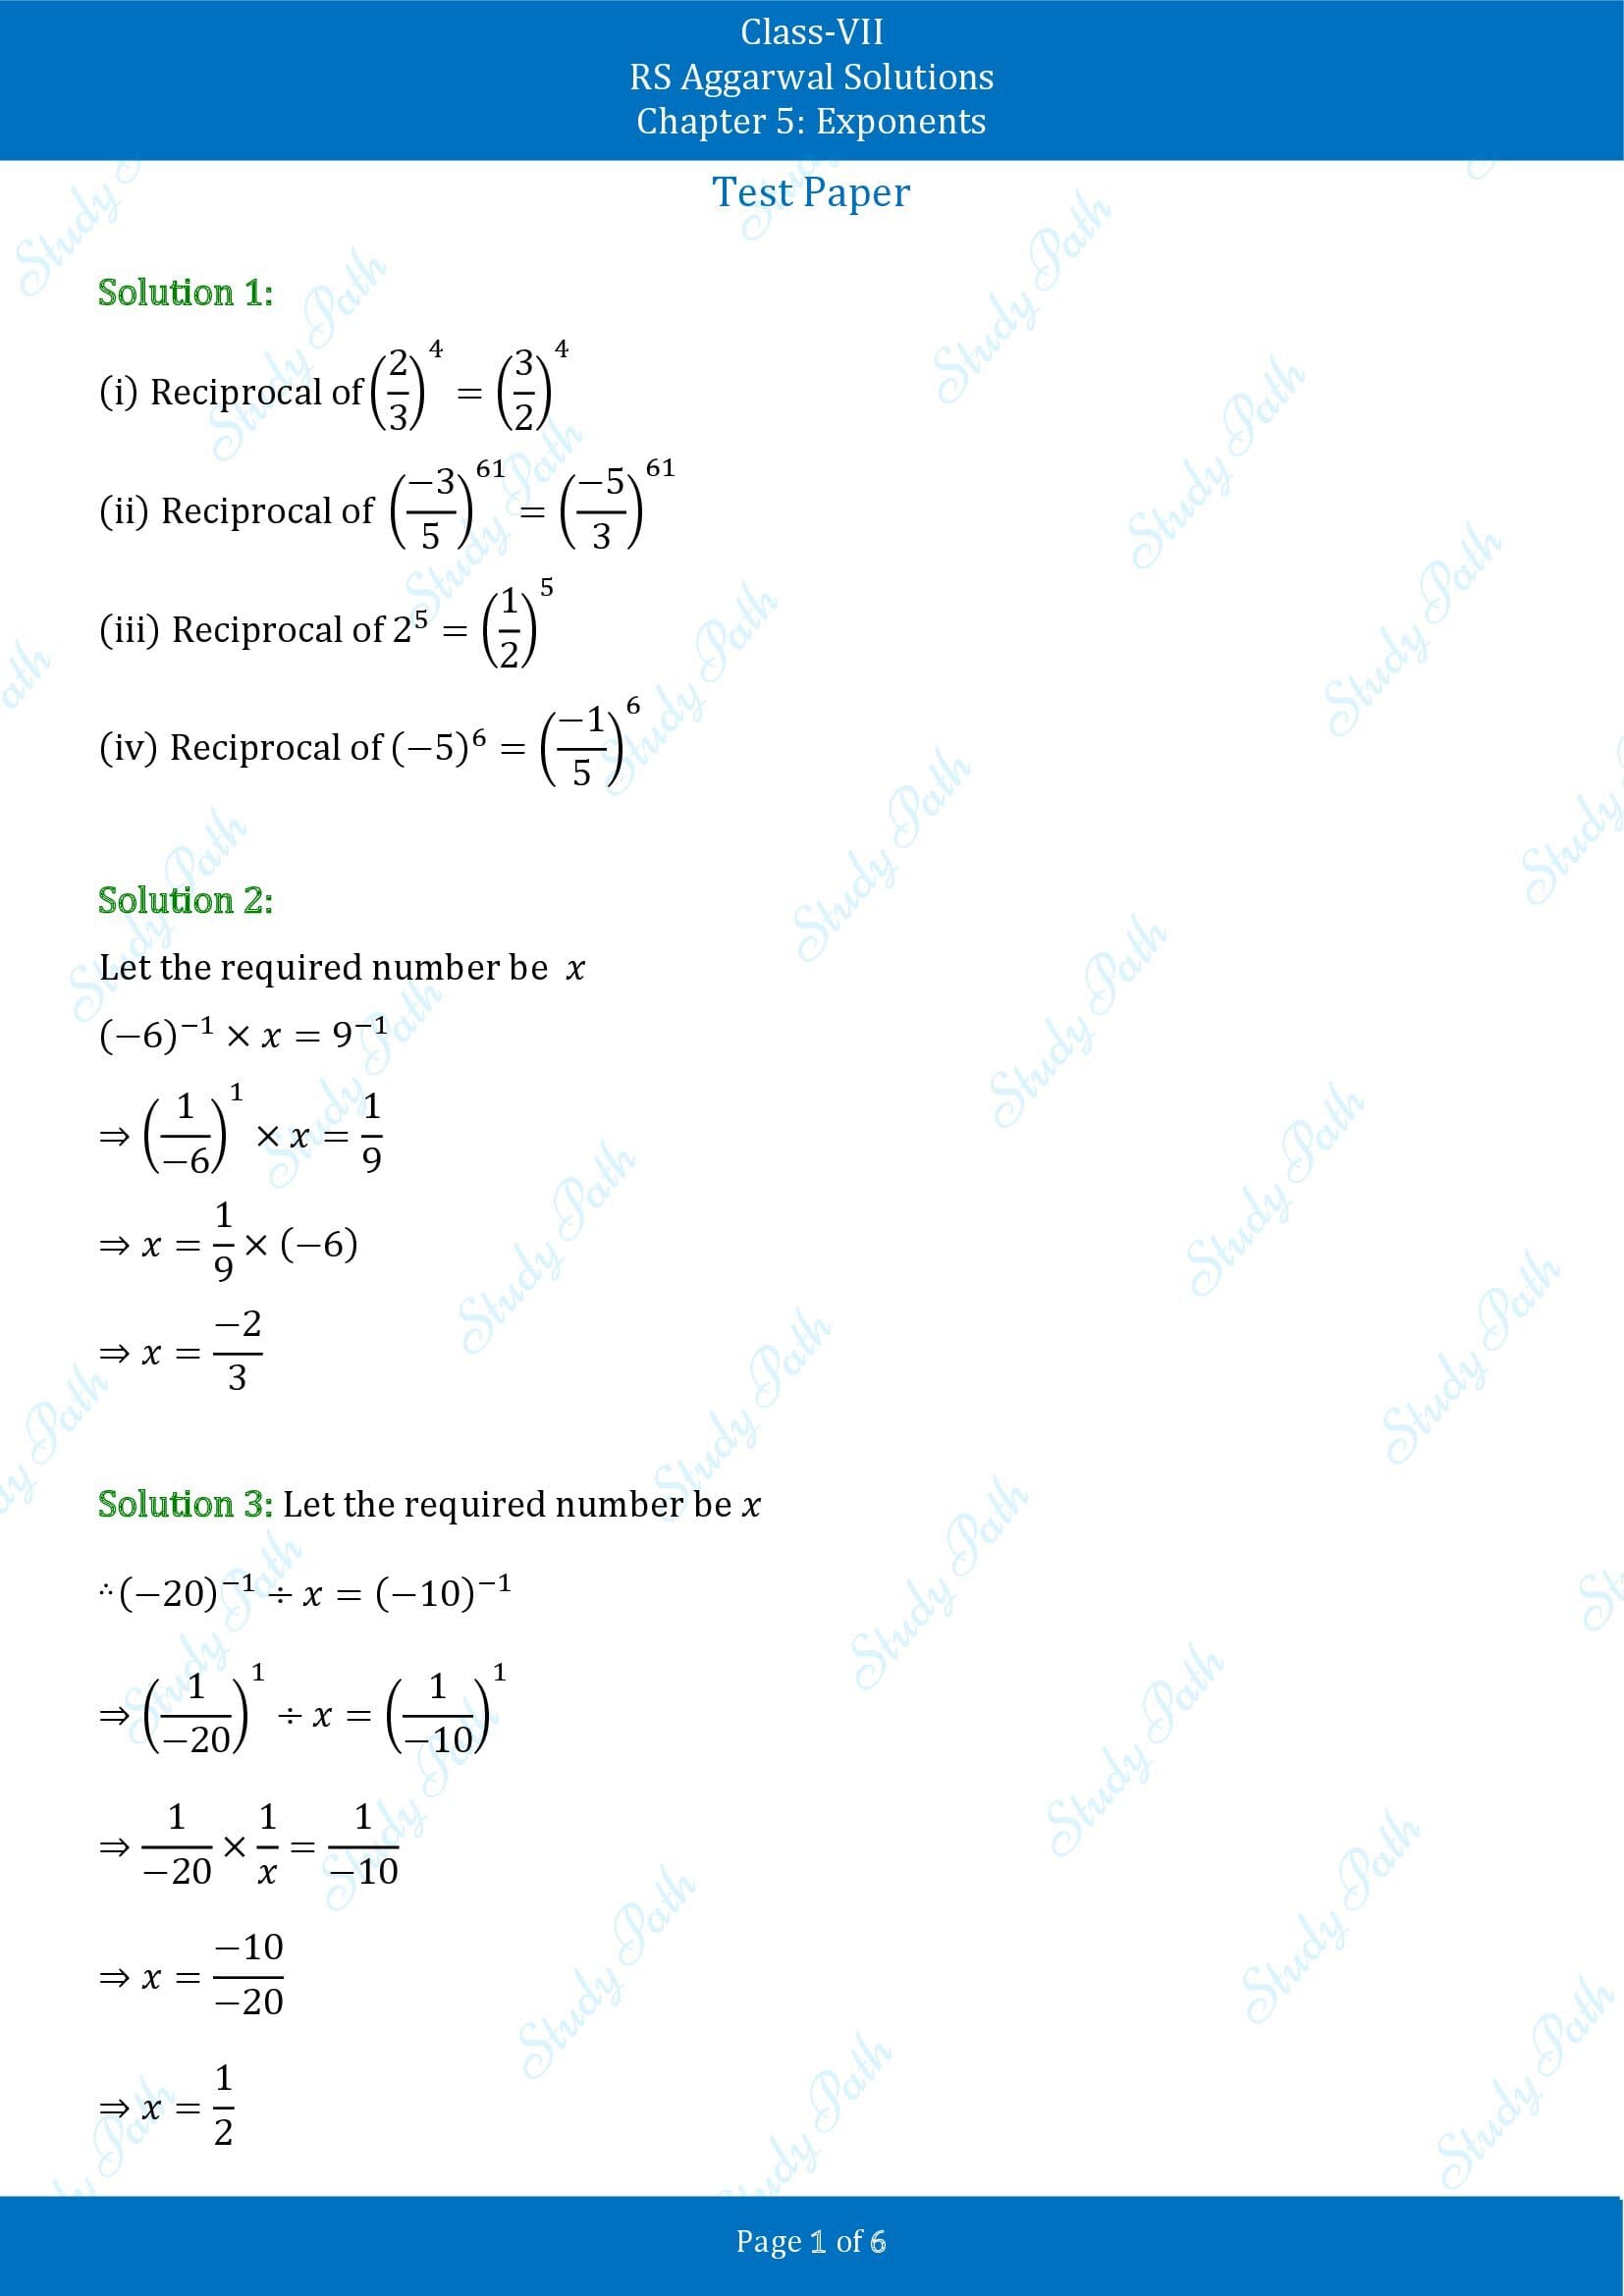 RS Aggarwal Solutions Class 7 Chapter 5 Exponents Test Paper 00001